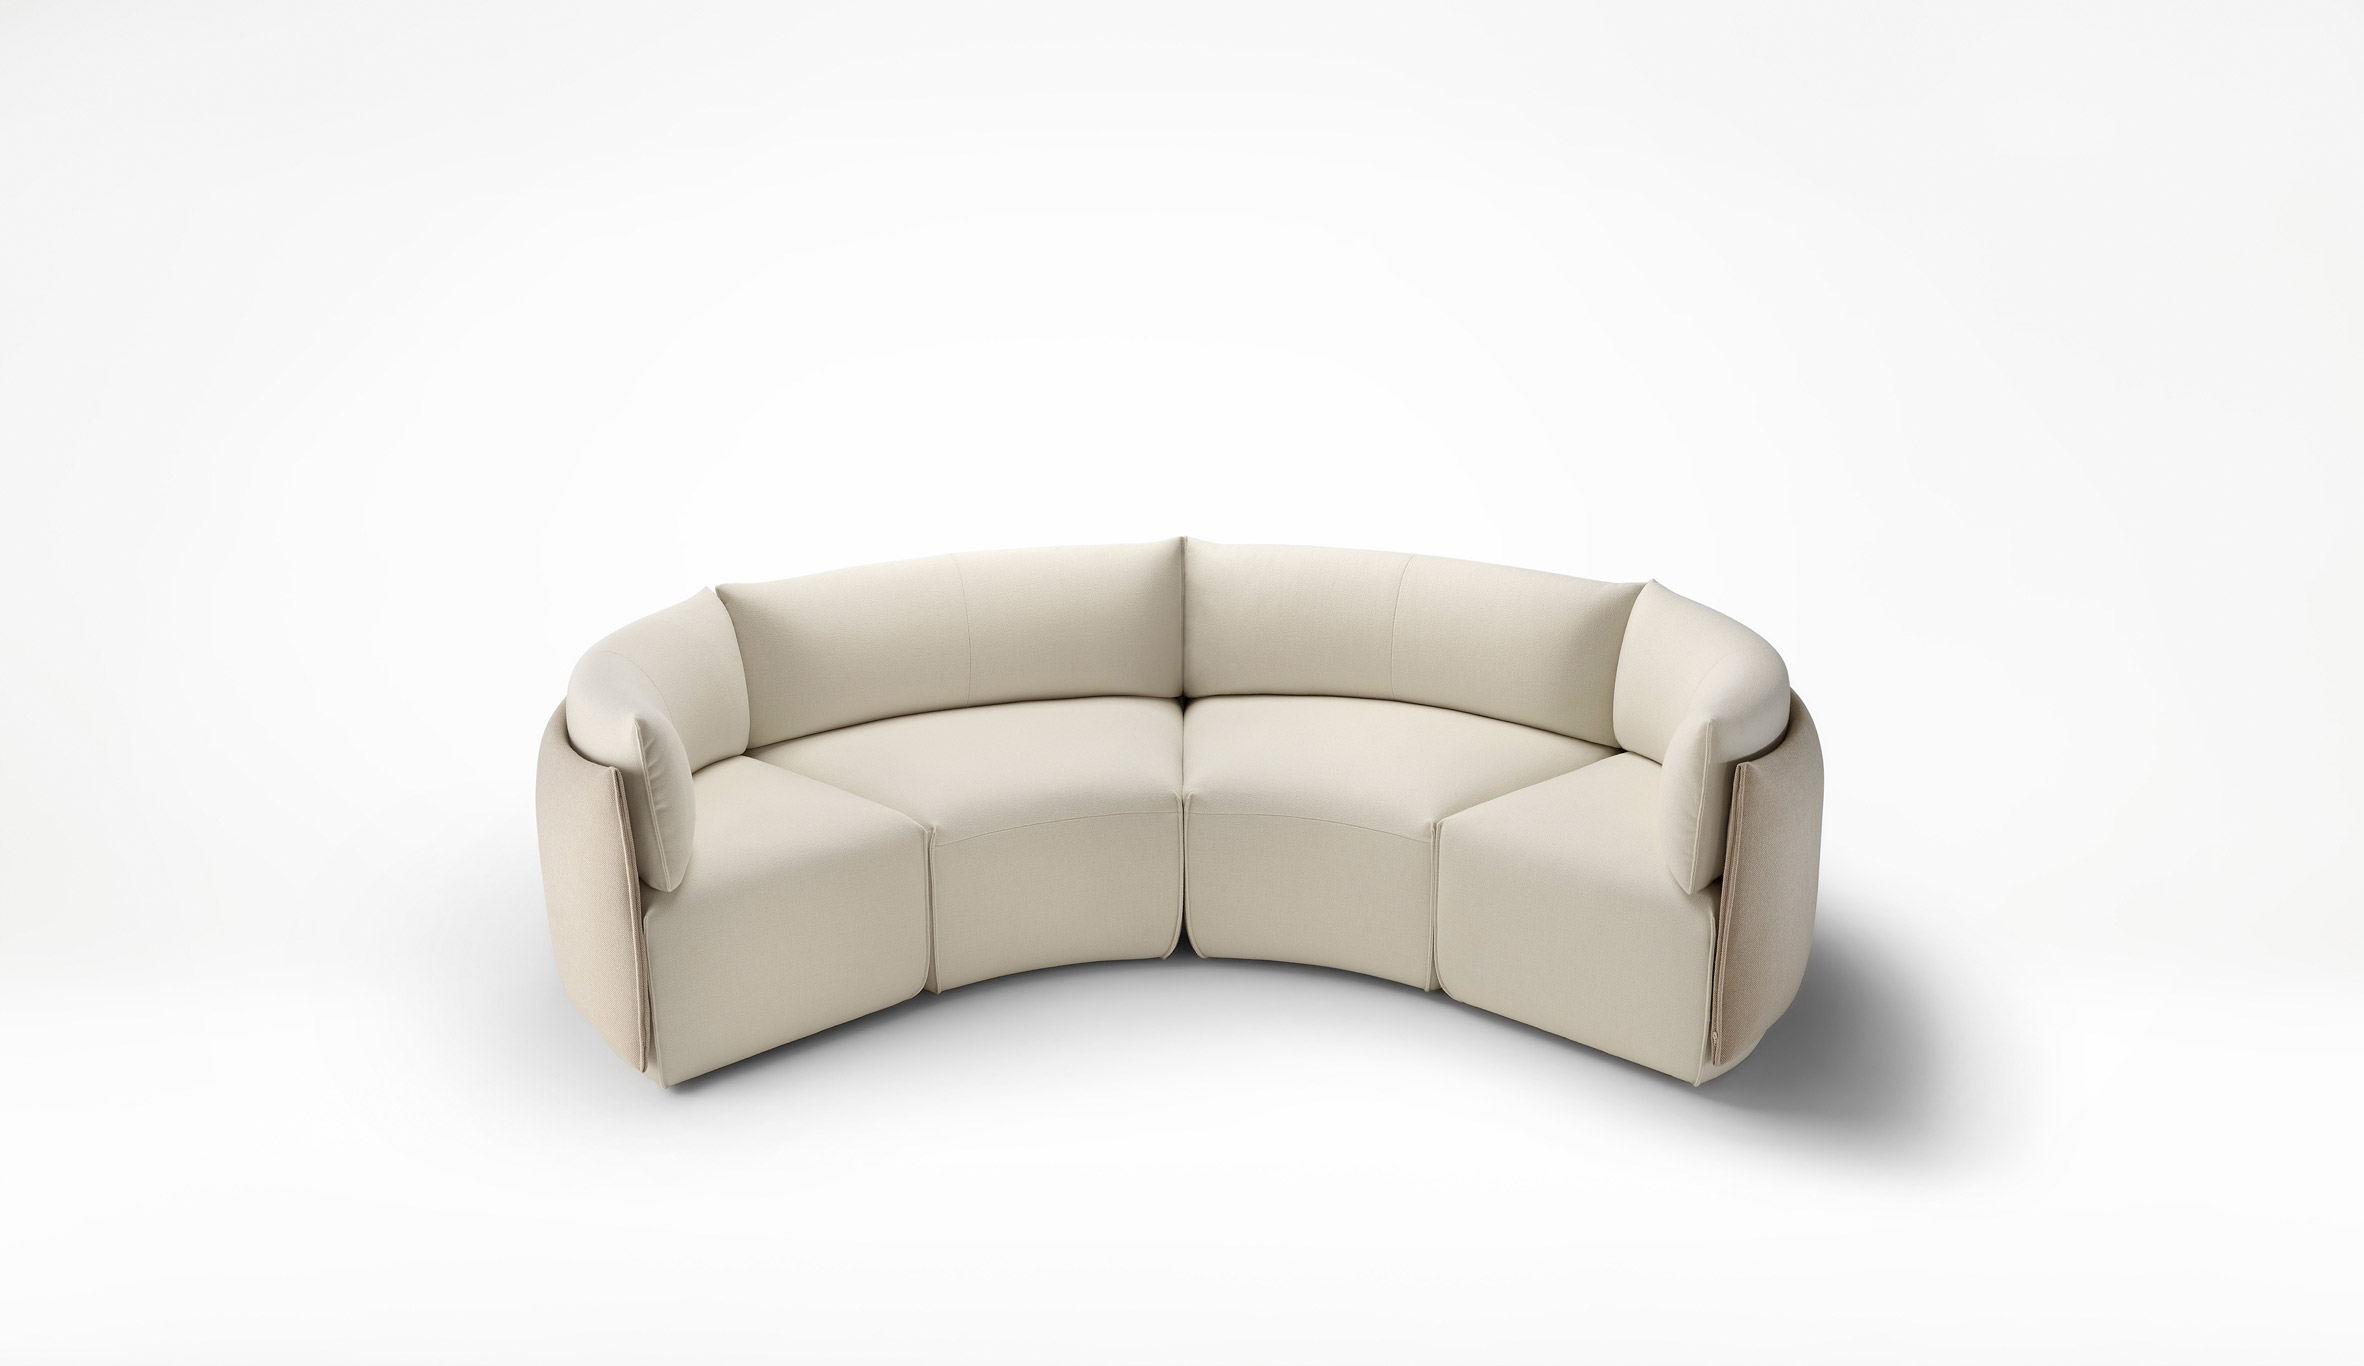 Place seating by Ross Gardam with curved elements